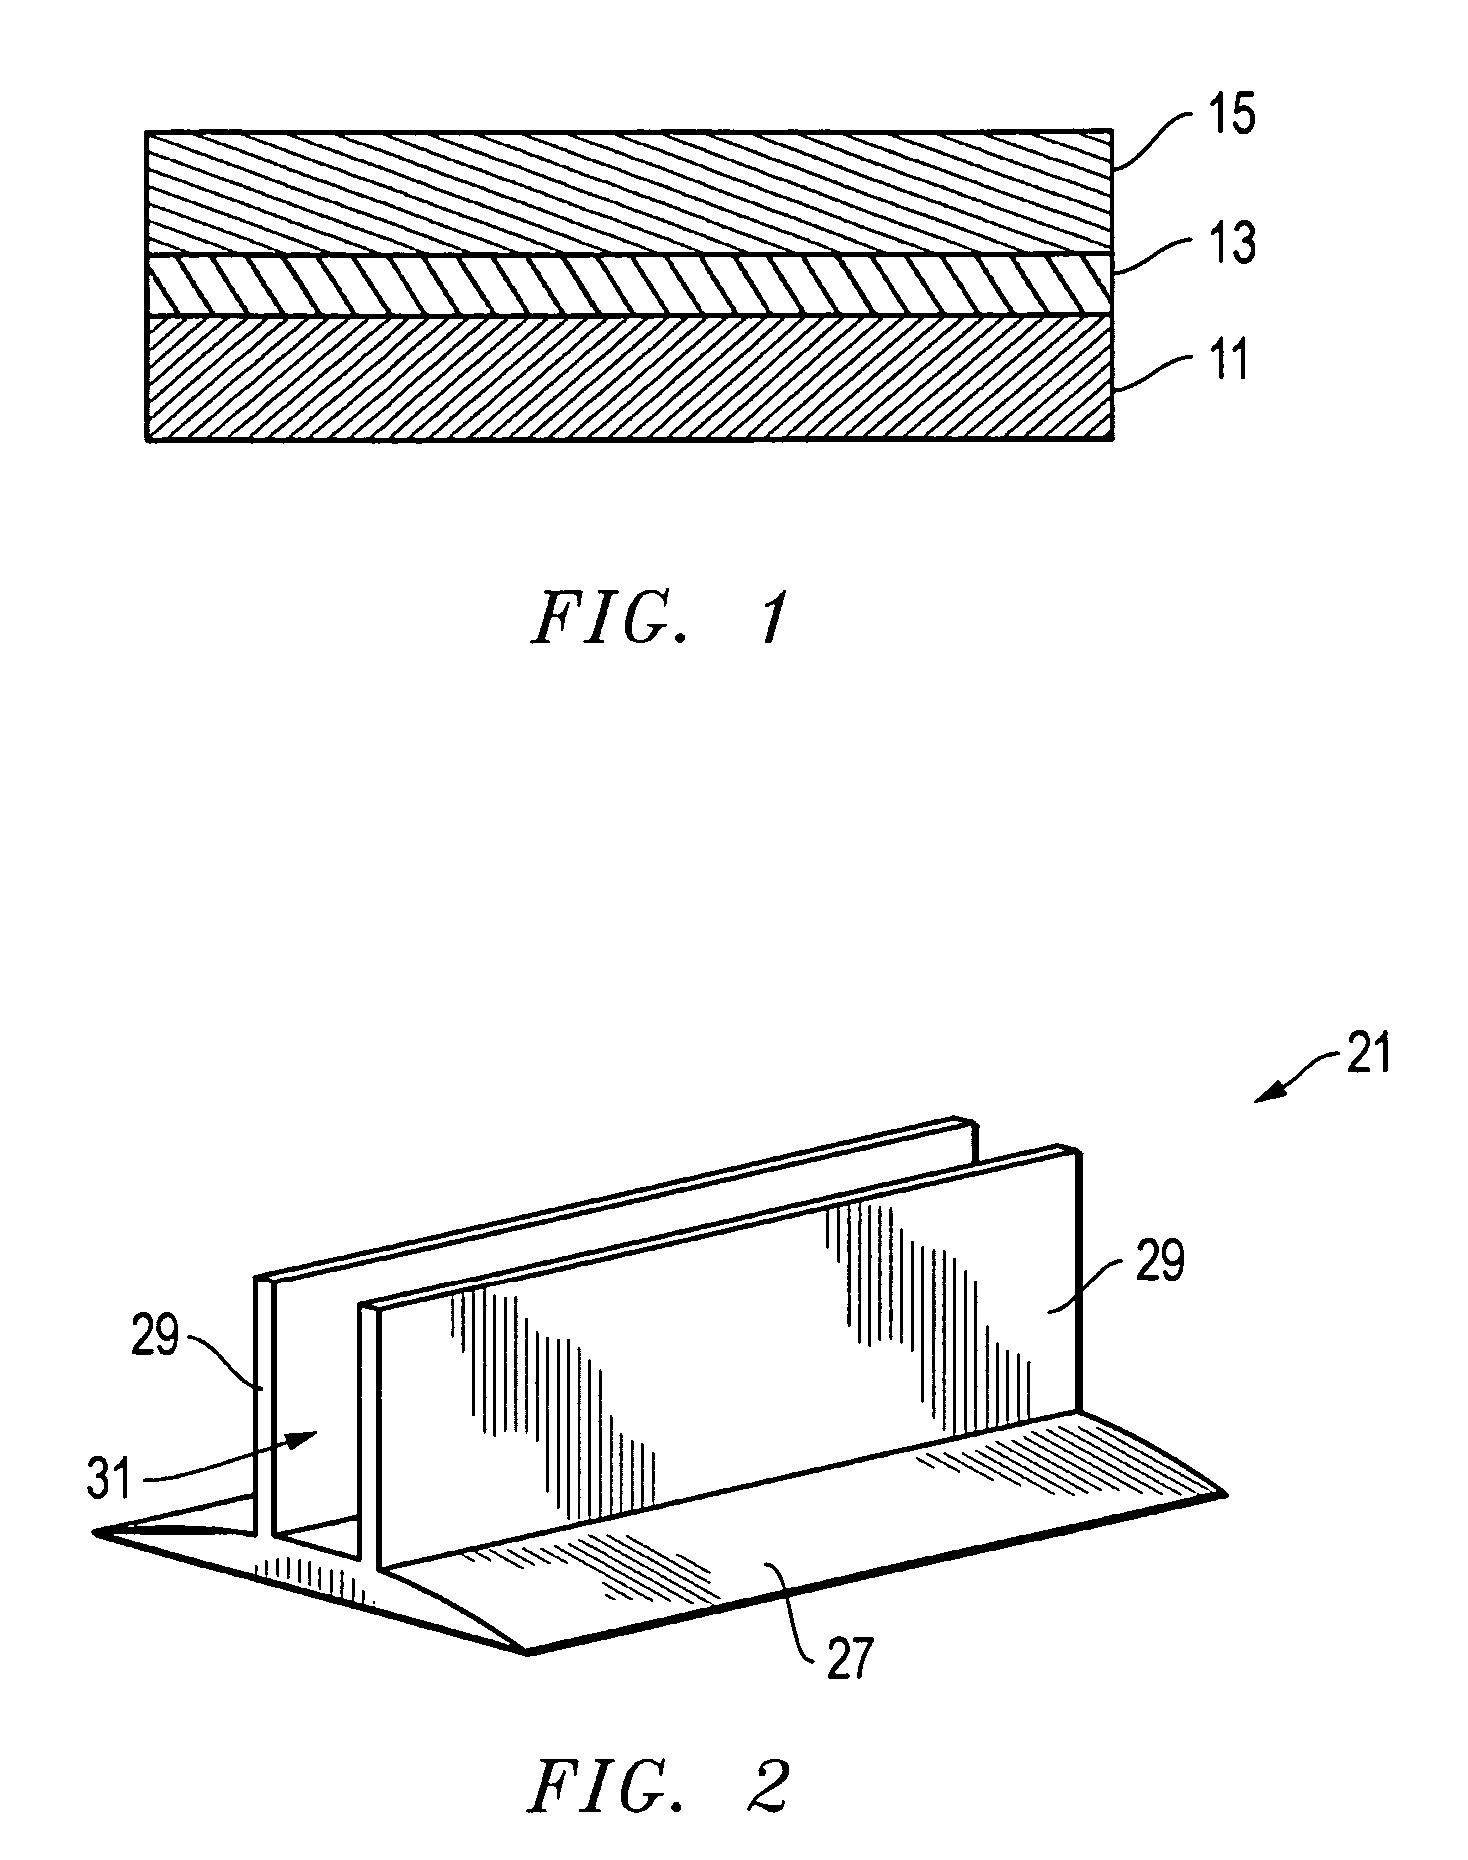 System, method, and apparatus for production-worthy, low cost composite tool fabrication